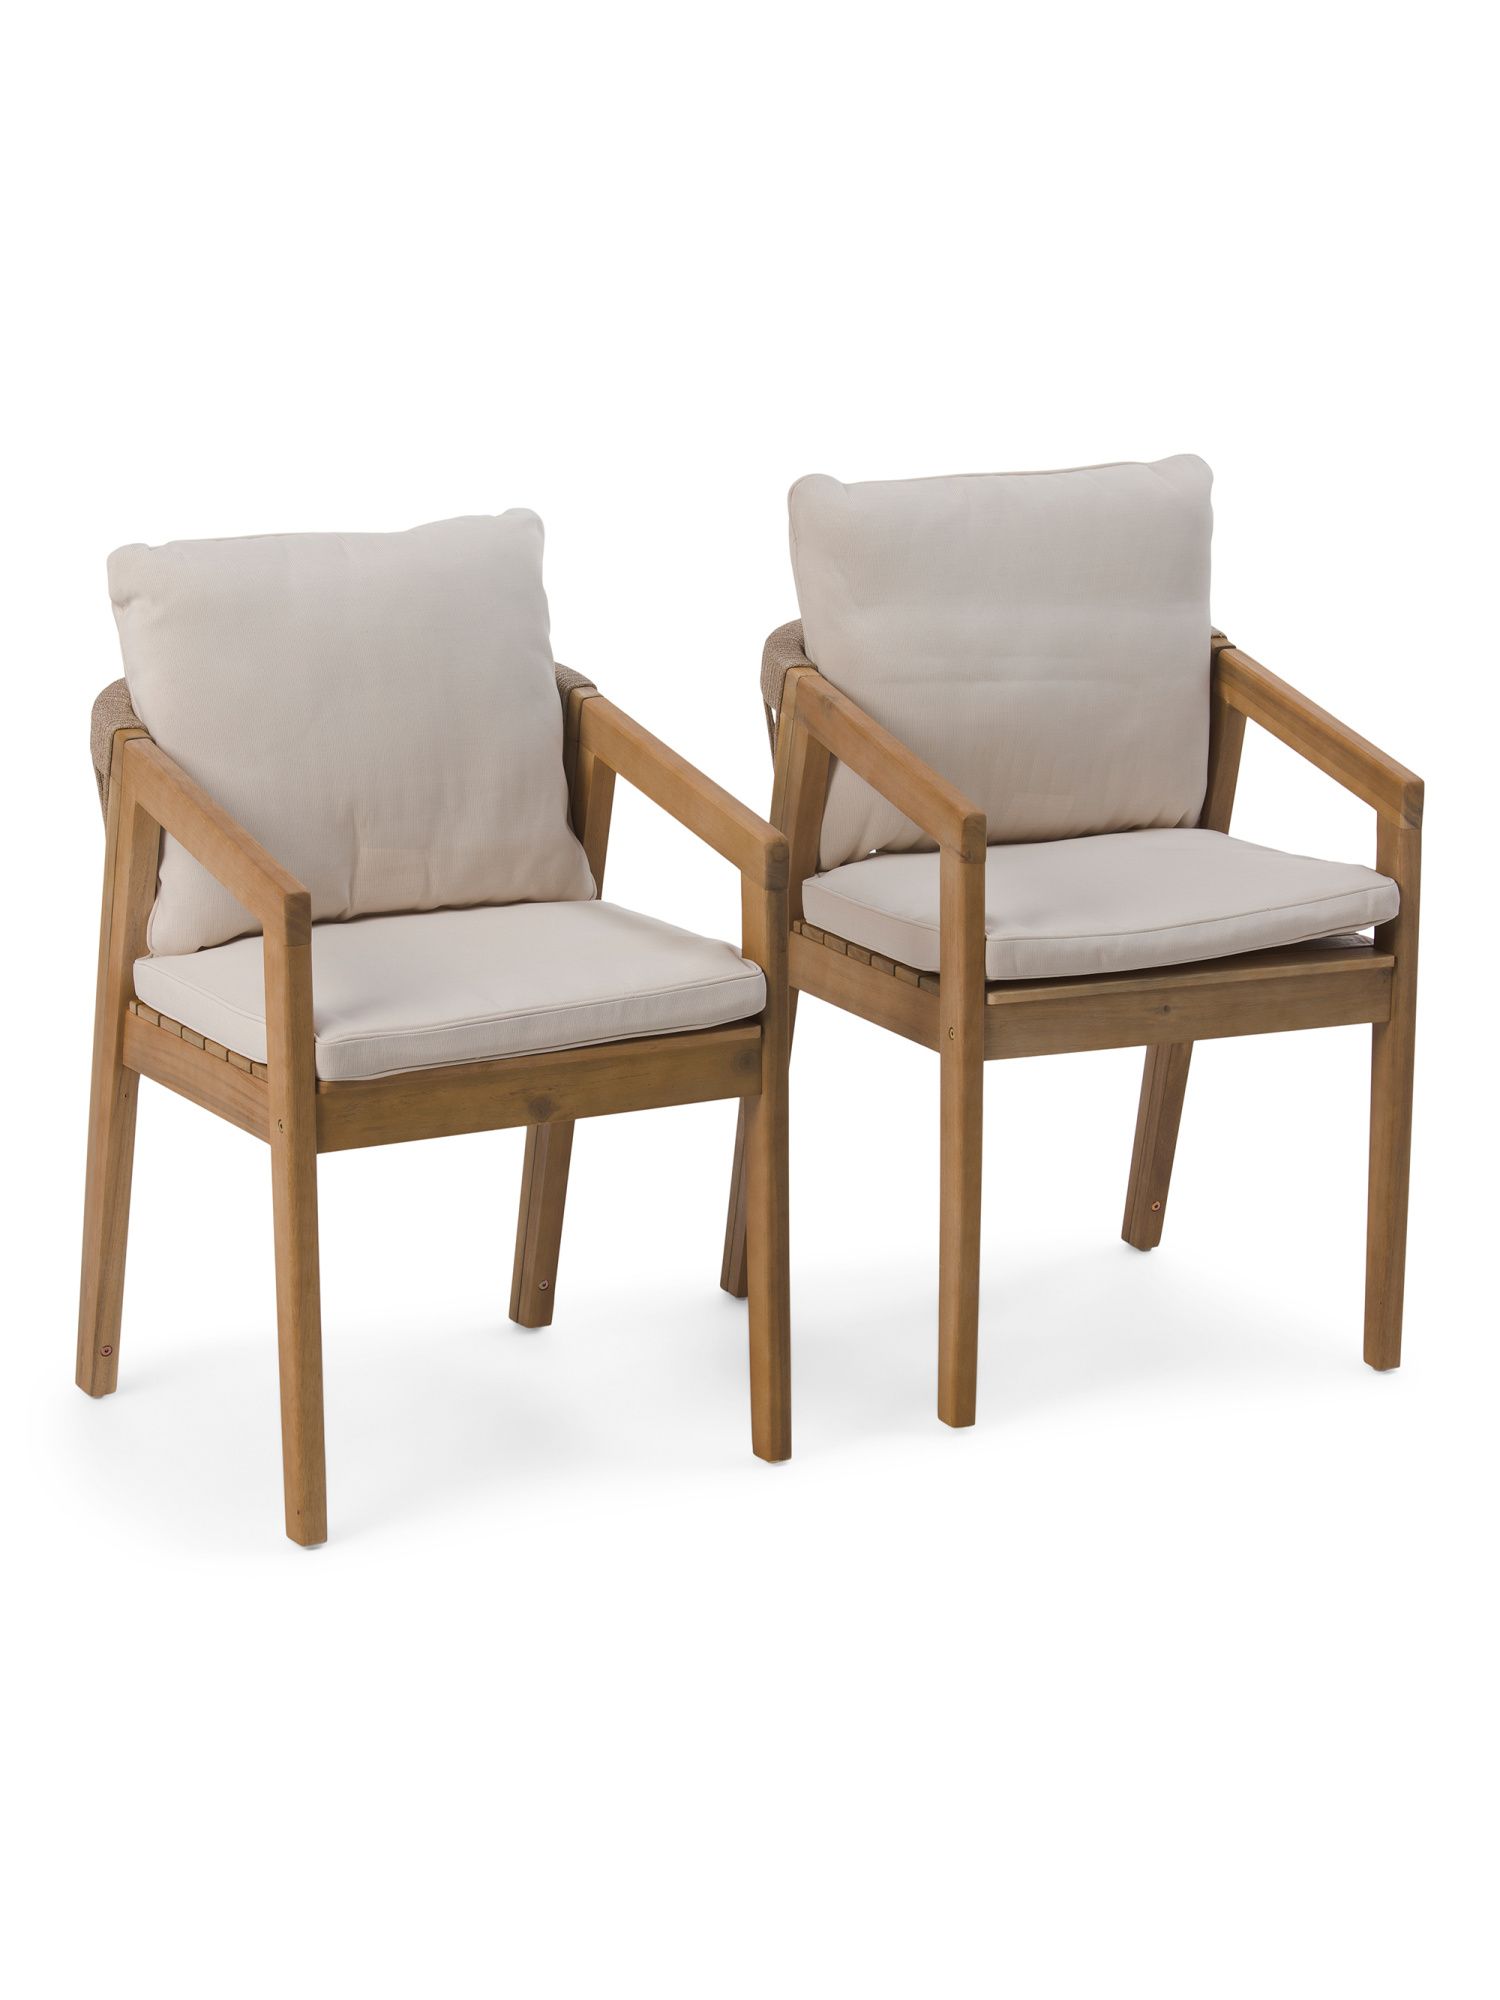 Set Of 2 Outdoor Arm Chair | Marshalls